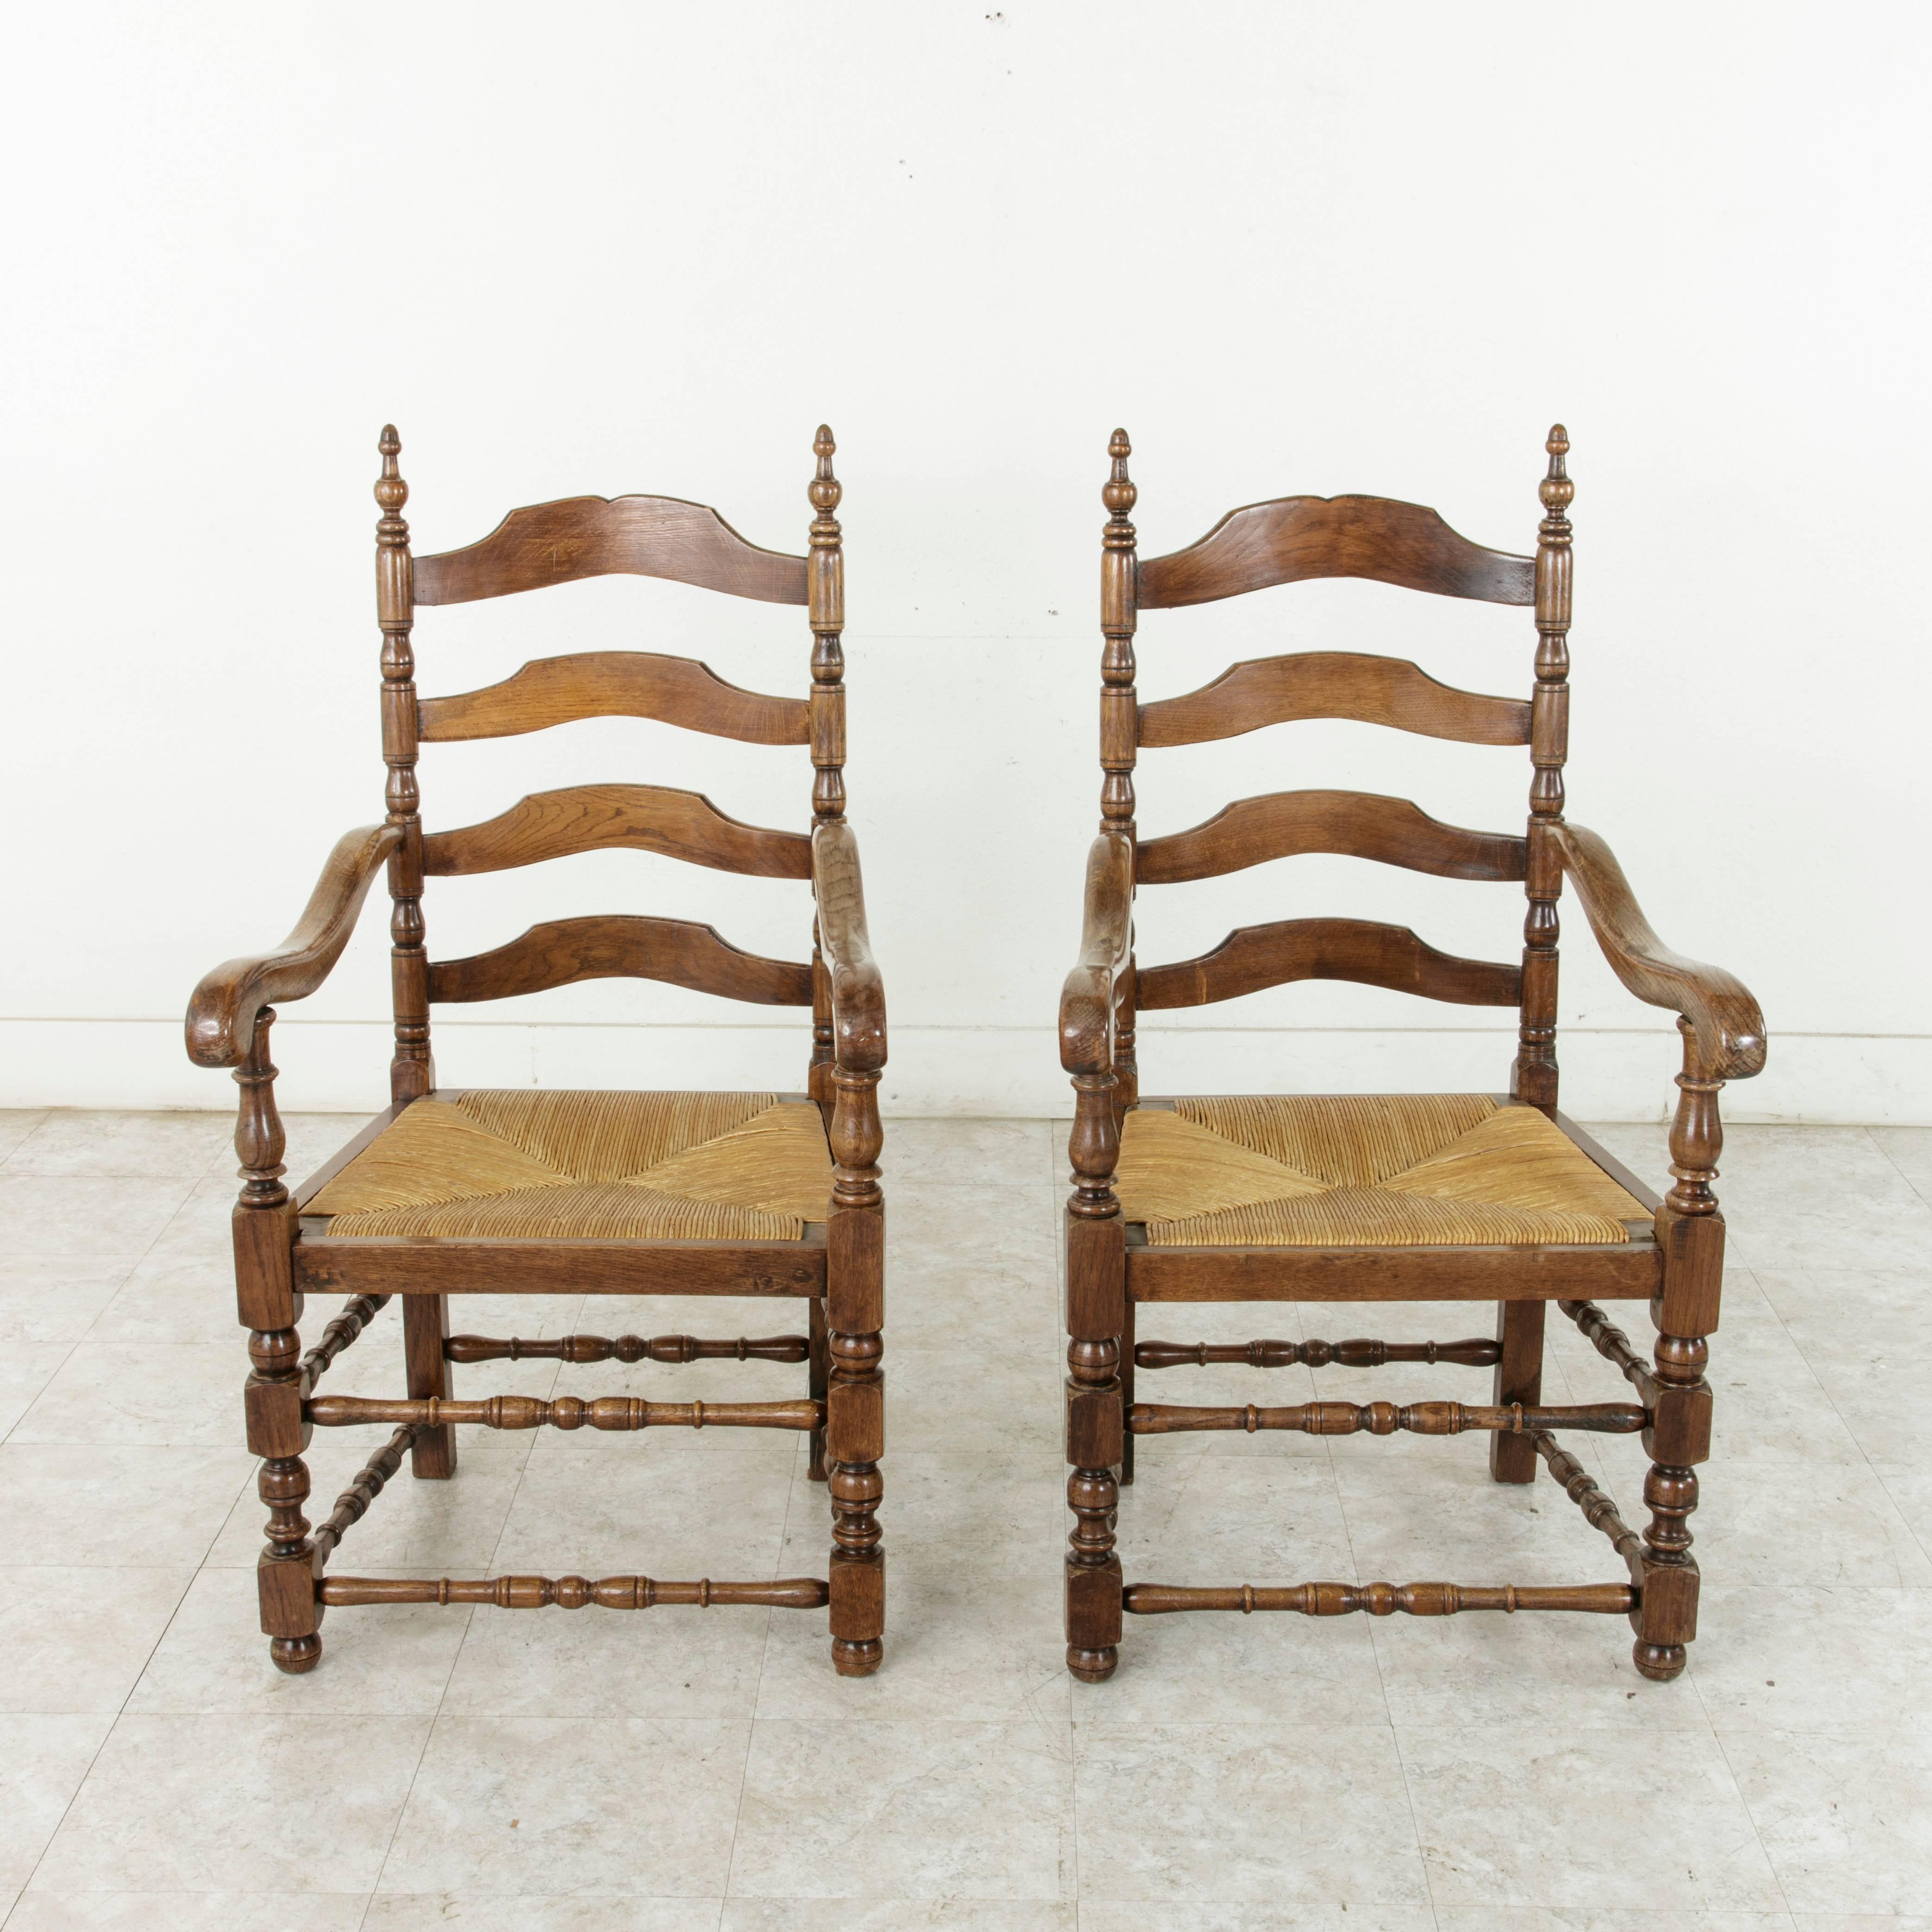 This pair of Louis Philippe style oak ladder back armchairs features turned legs and rush seats. Multiple turned crossbars between the legs provide extra stability. The unusually large rush seats measure 20 inches wide and 19 inches deep, and are